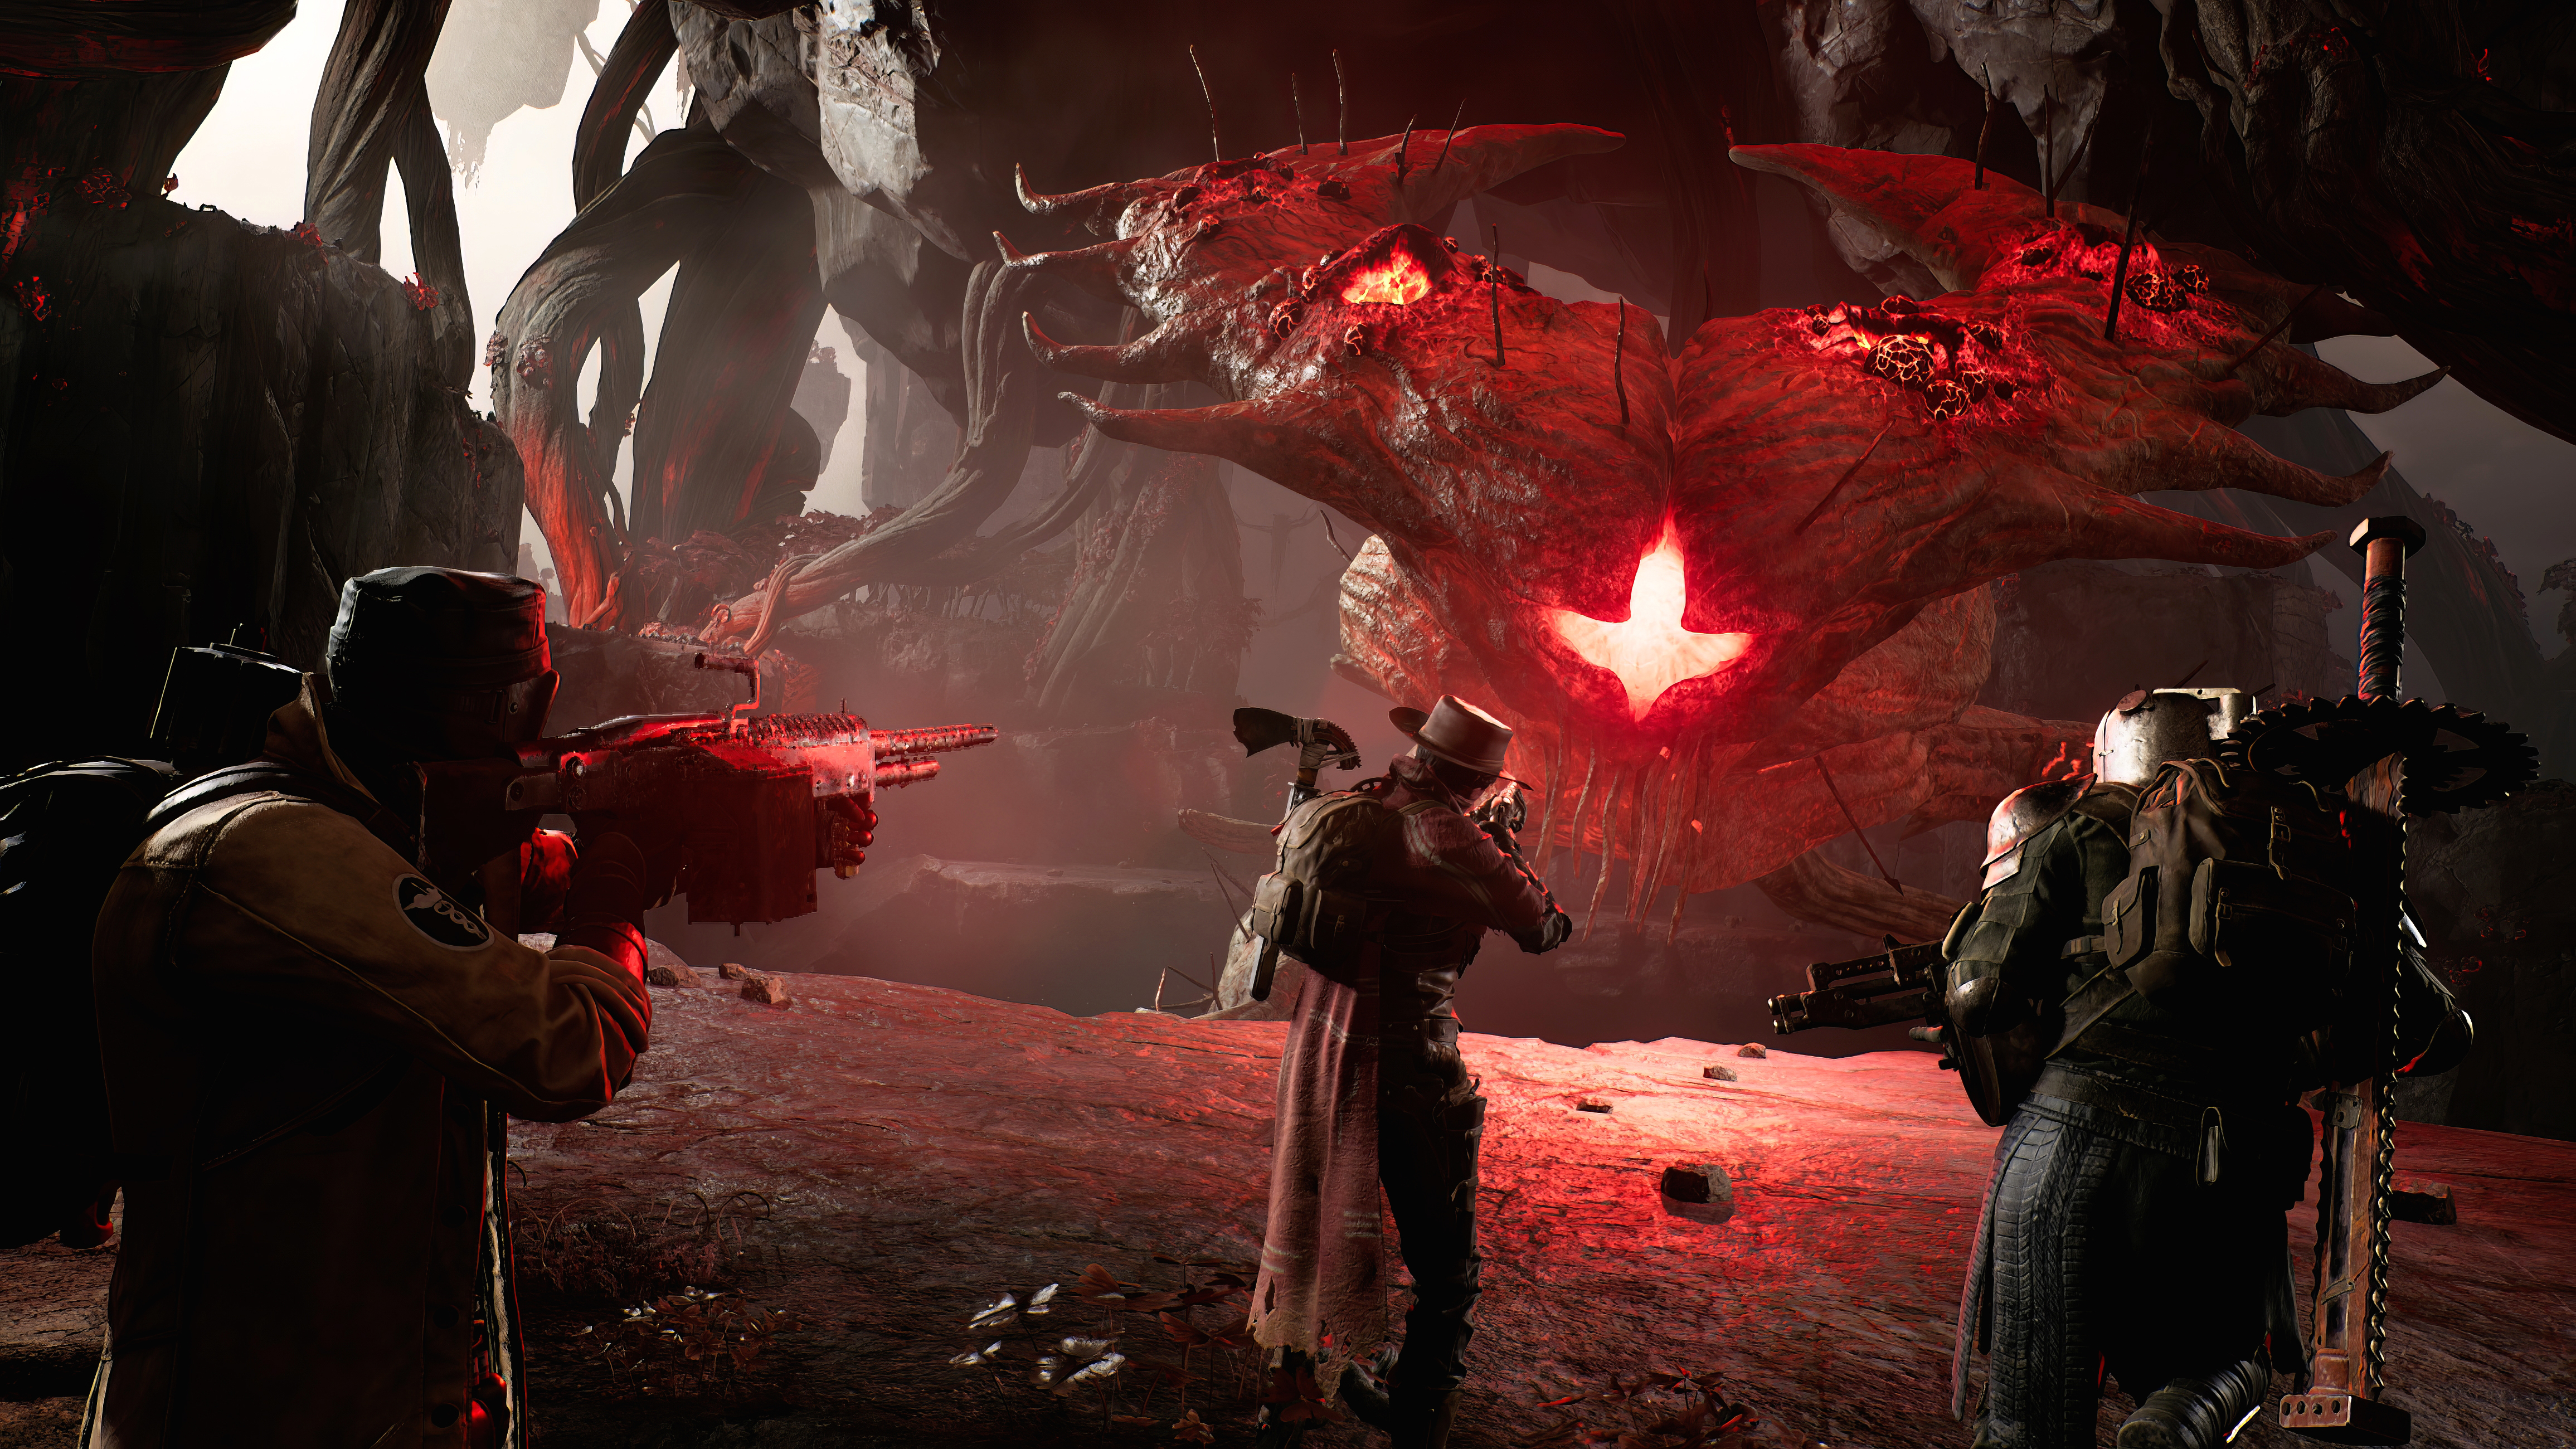 Three player chartacters aim their weapons at a large, glowing, insectoid enemy in Remnant 2